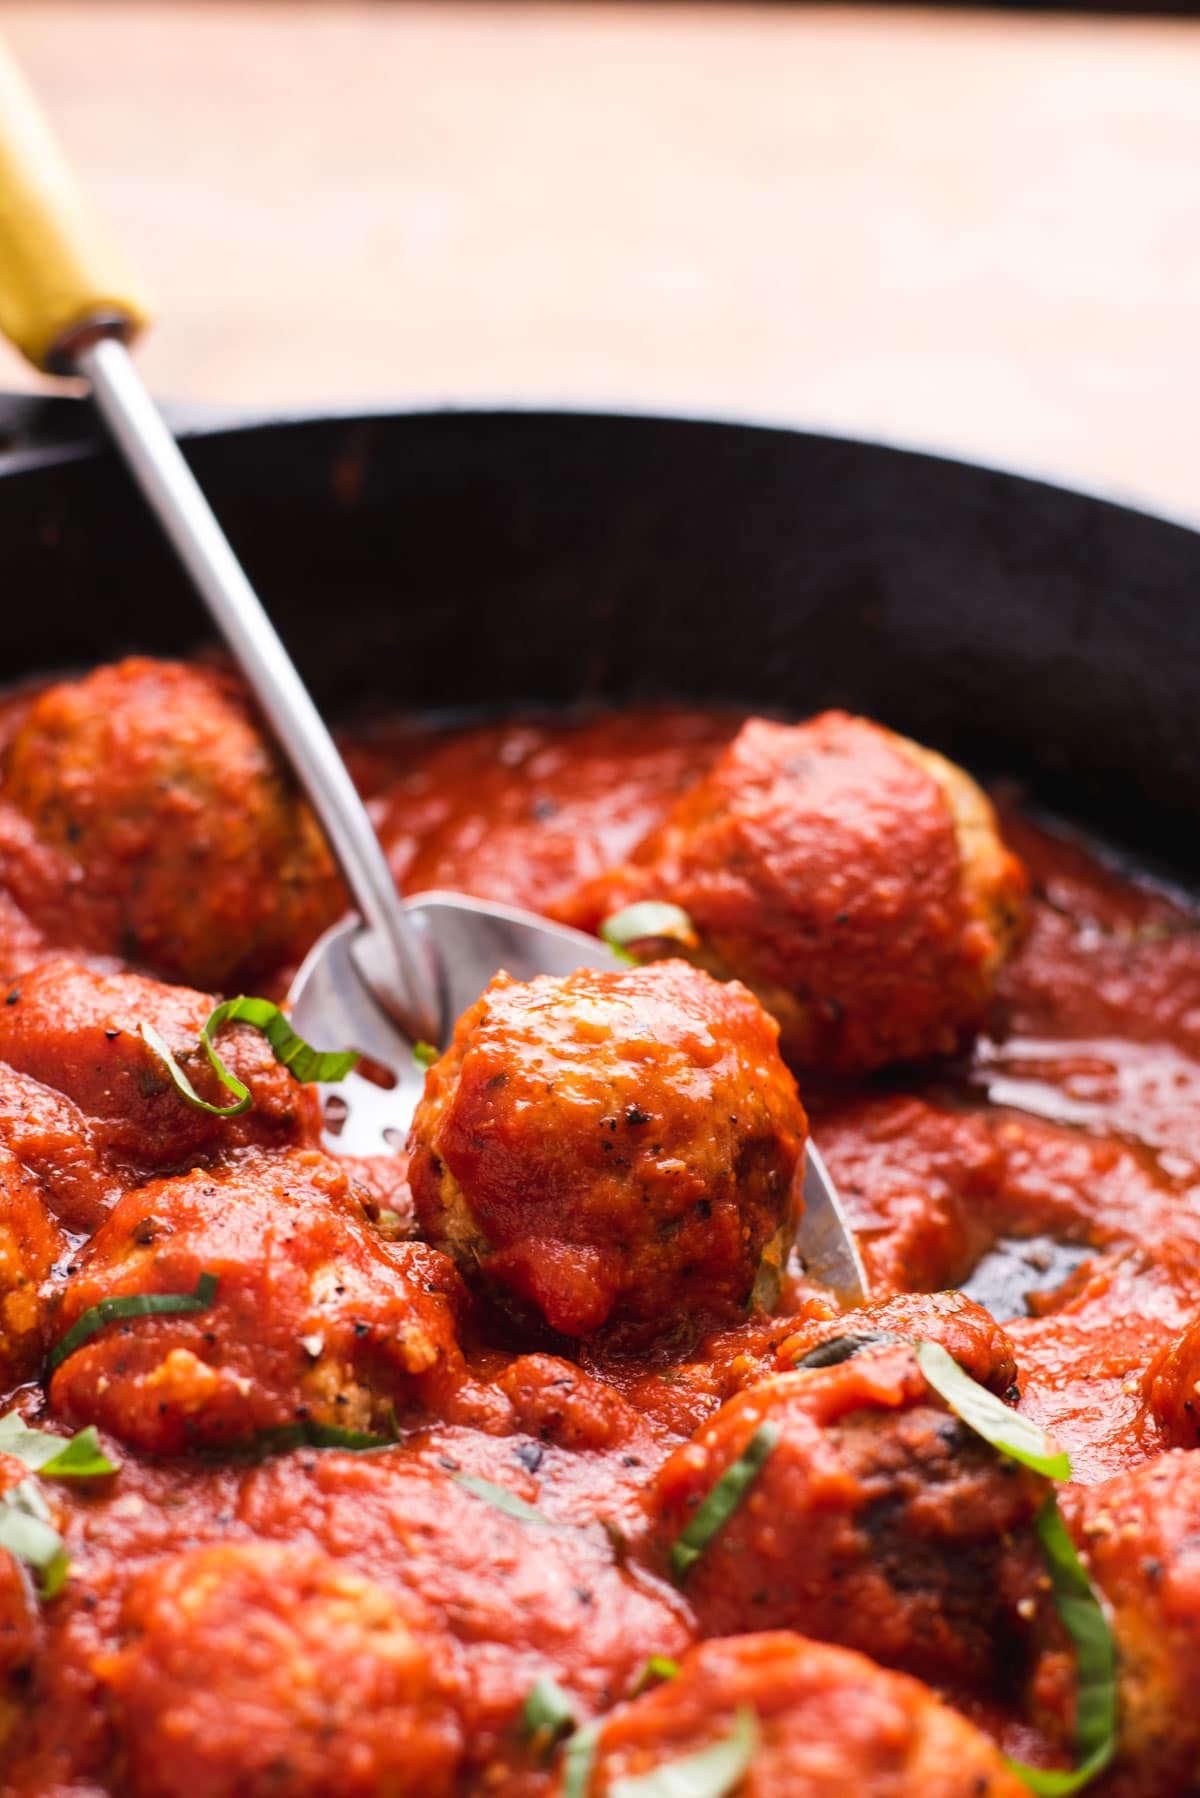 Meatball being lifting out of tomato sauce with metal serving spoon.